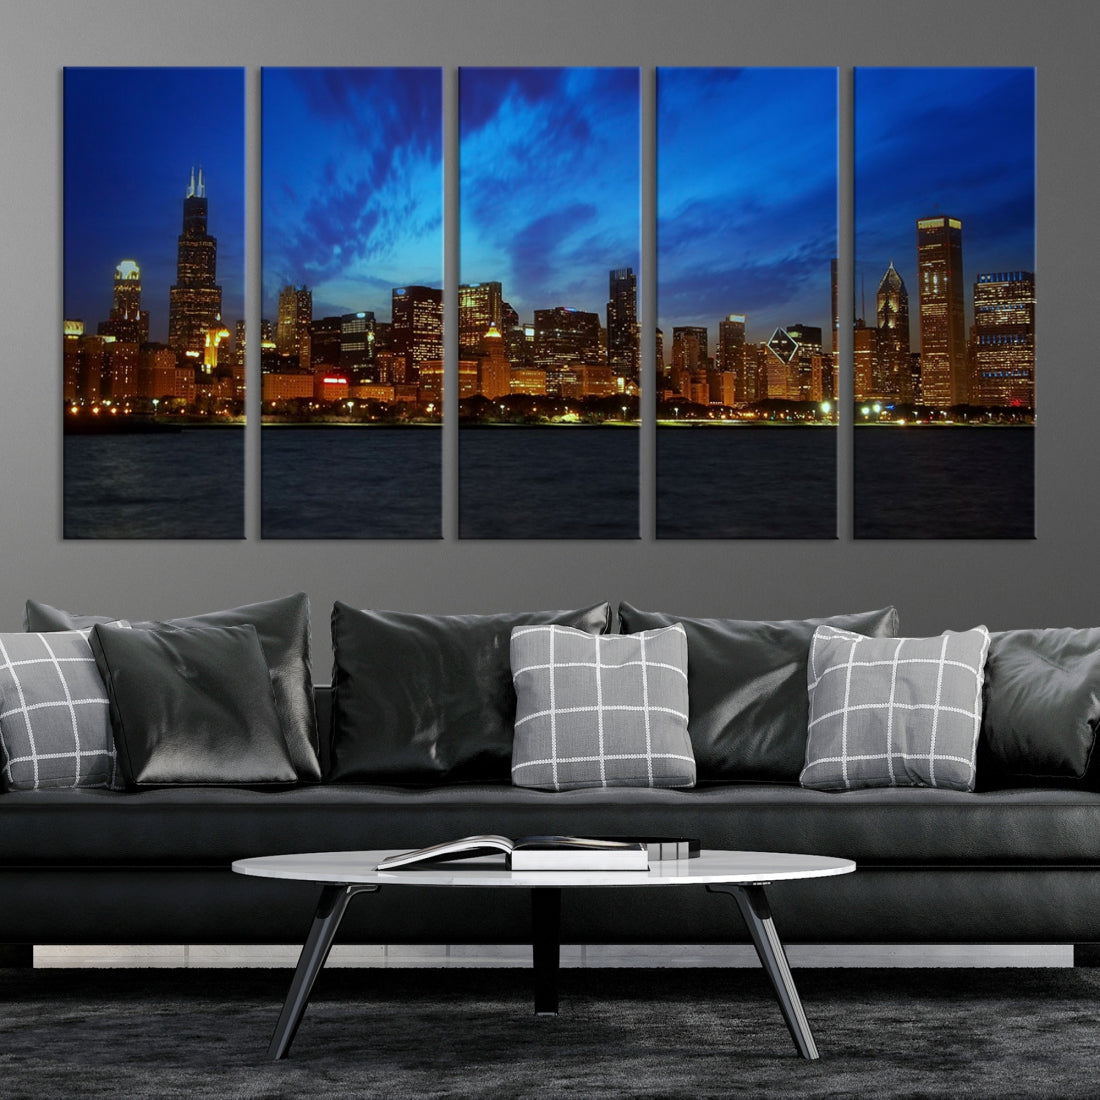 Chicago City Lights Night Blue Cloudy Skyline Cityscape View Large Wall Art Canvas Print